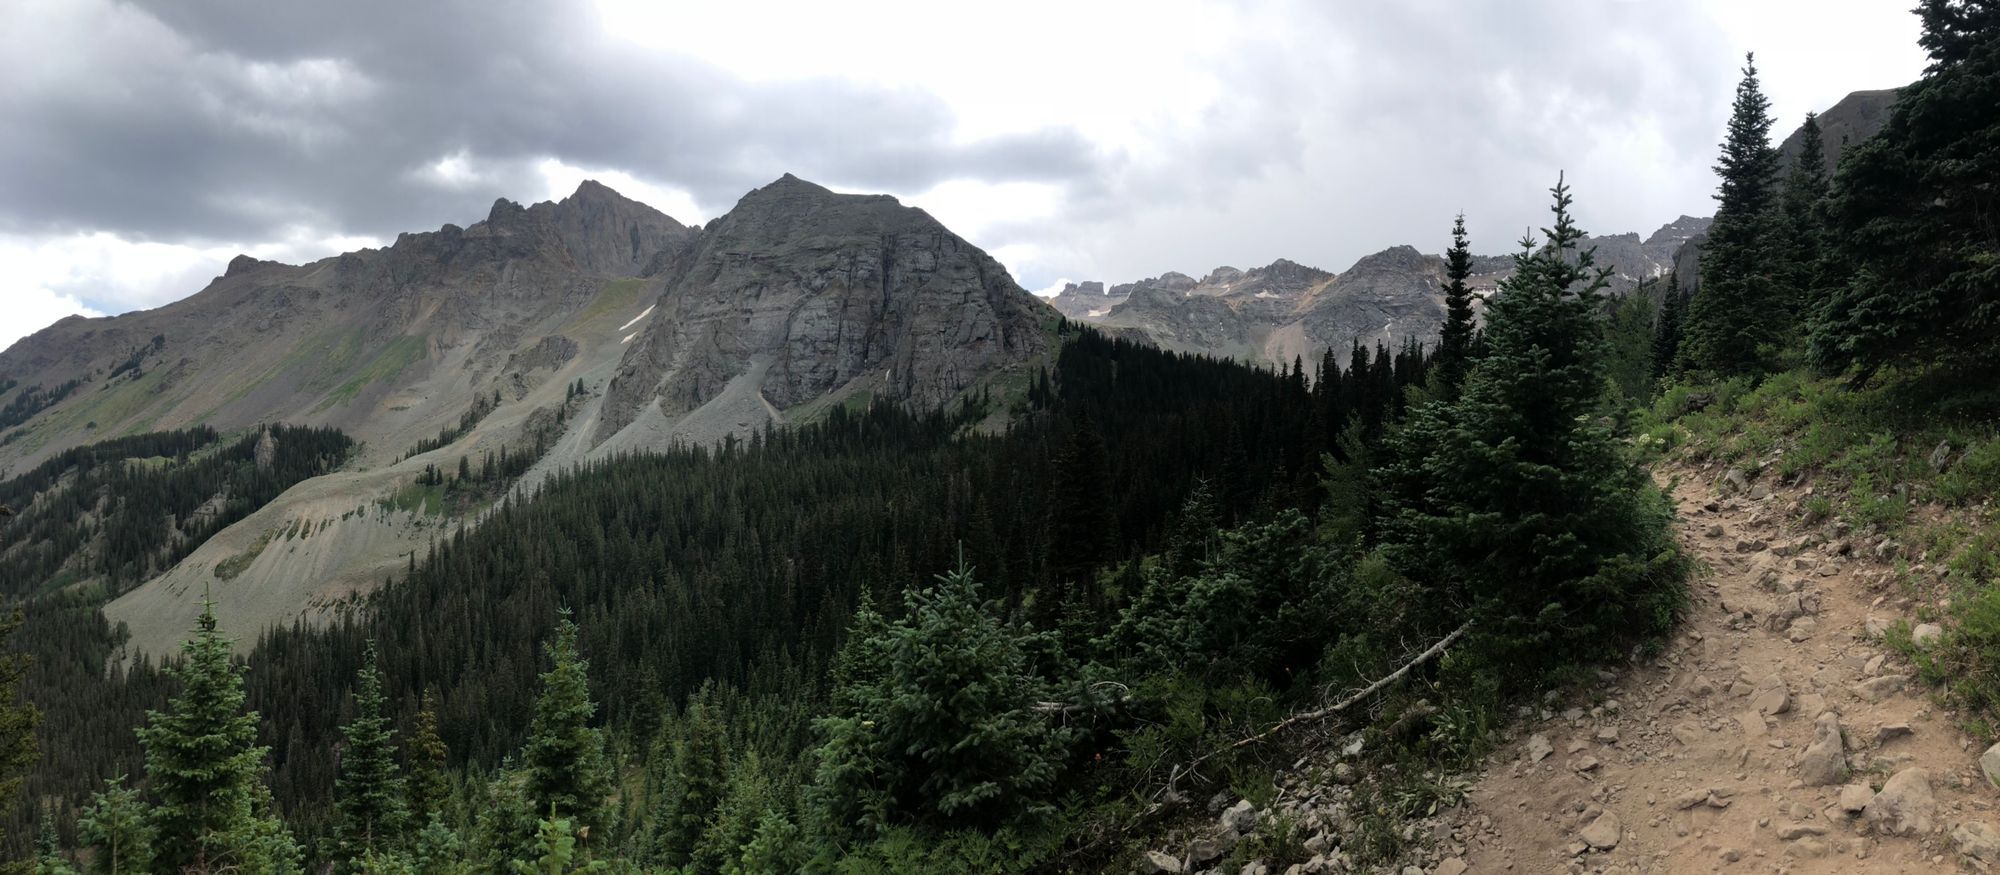 Panorama of the Uncompahgre National Forest, cliffs, and trail we were taking